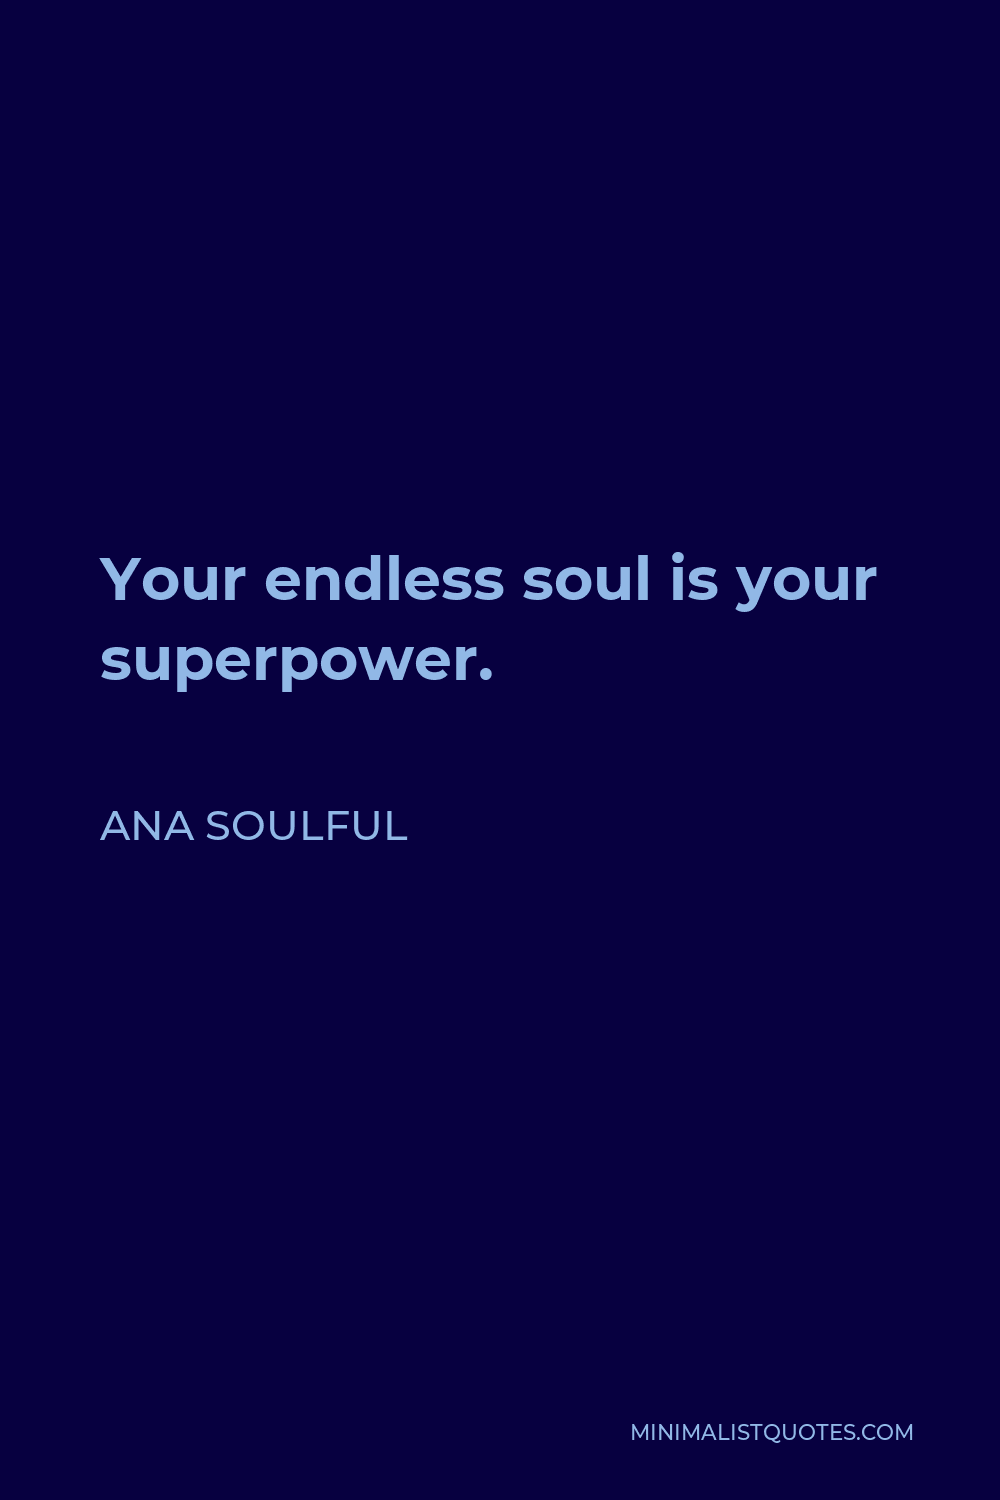 Ana Soulful Quote - Your endless soul is your superpower.